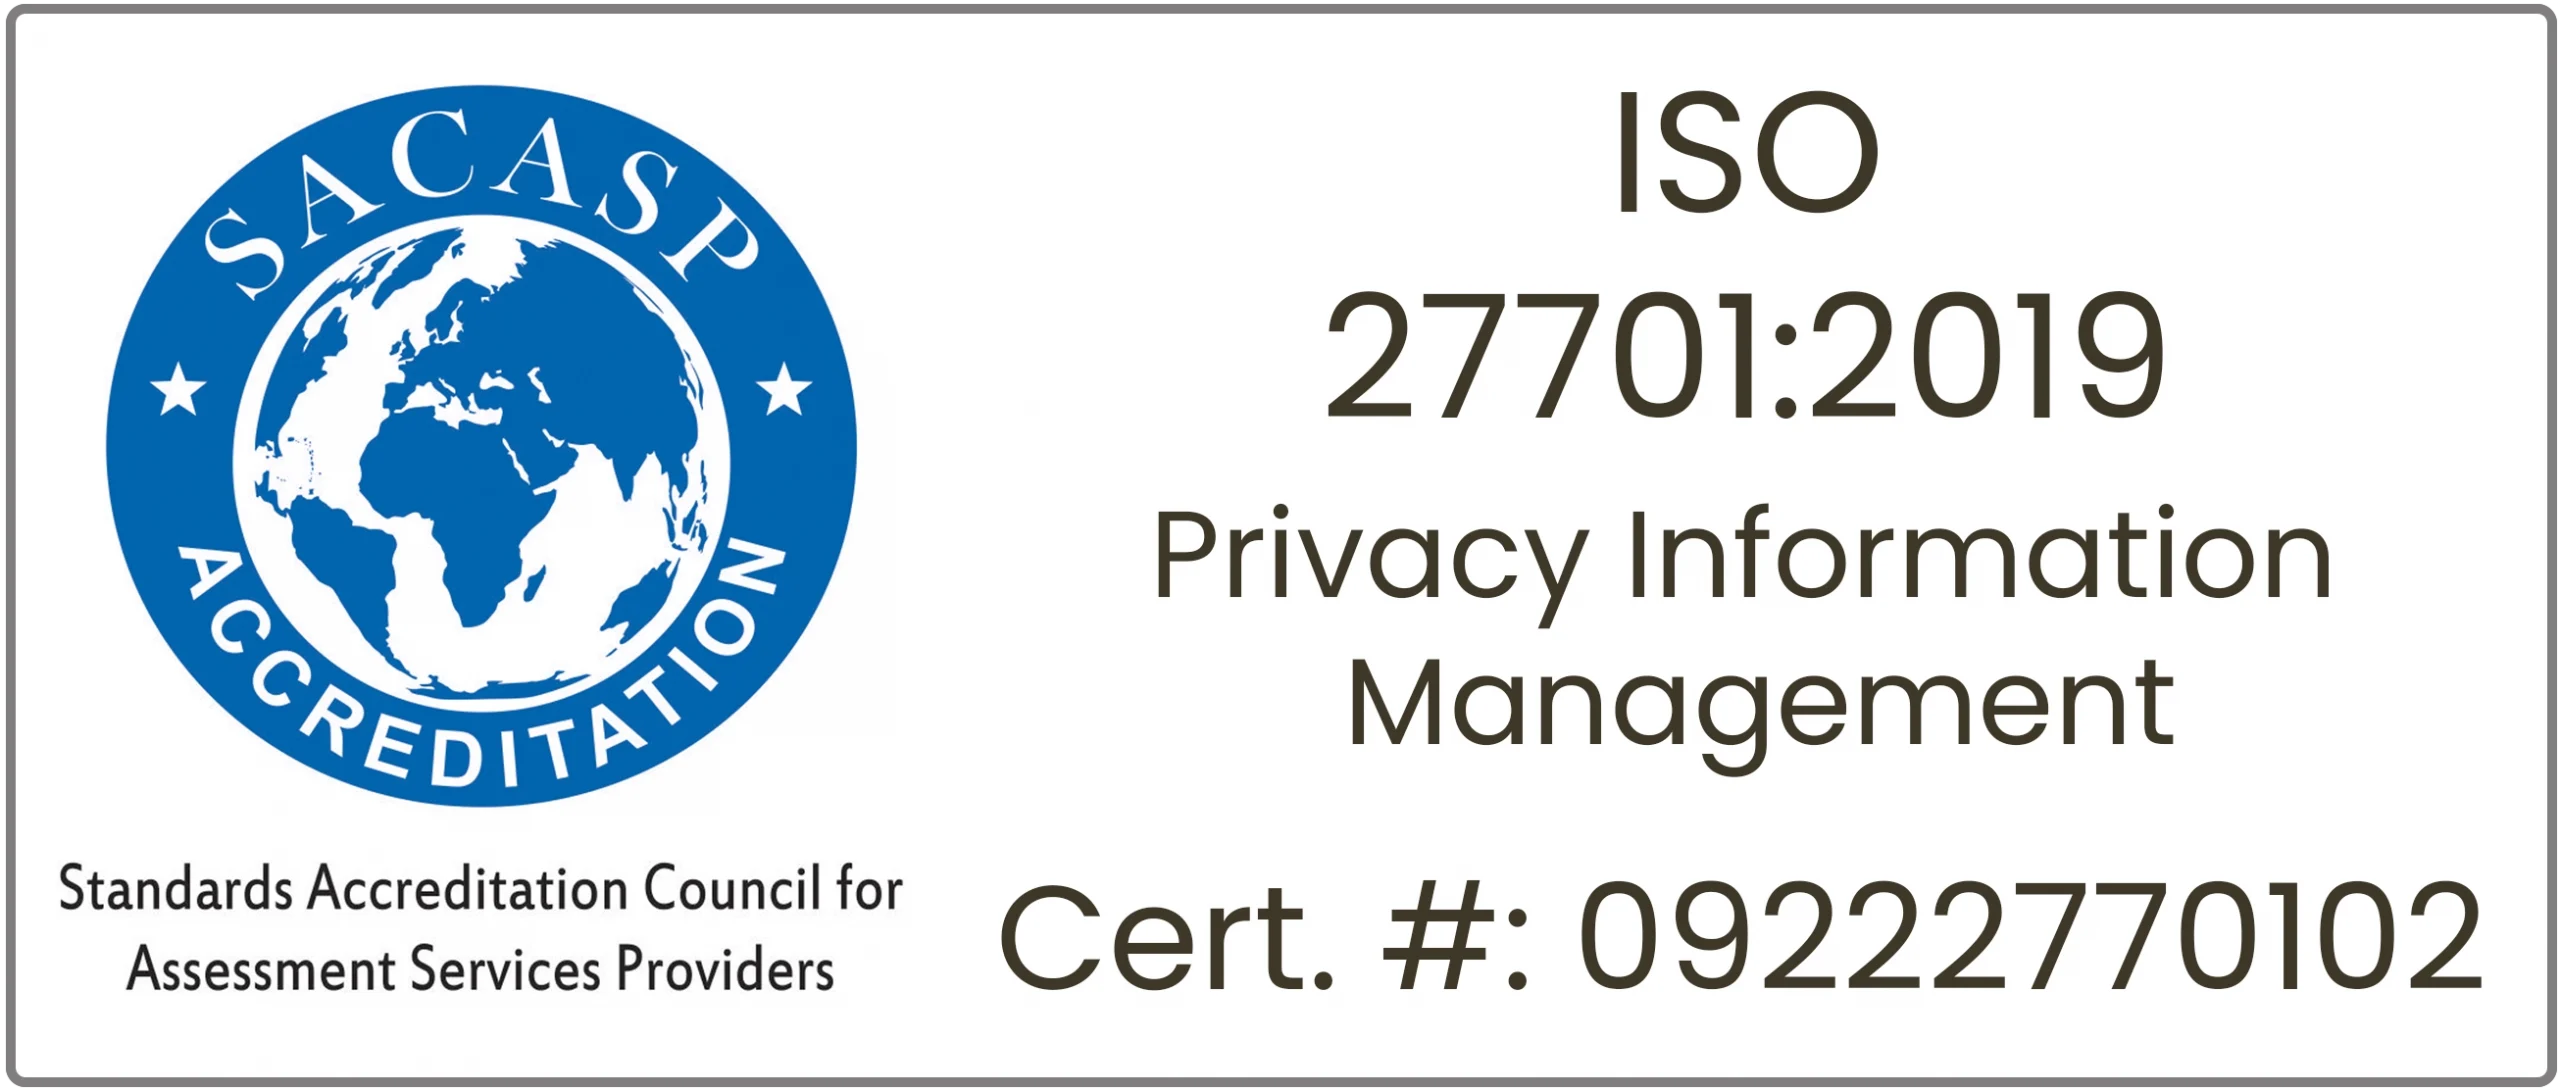 ISO/IEC 27701:2019 - Privacy Information Management